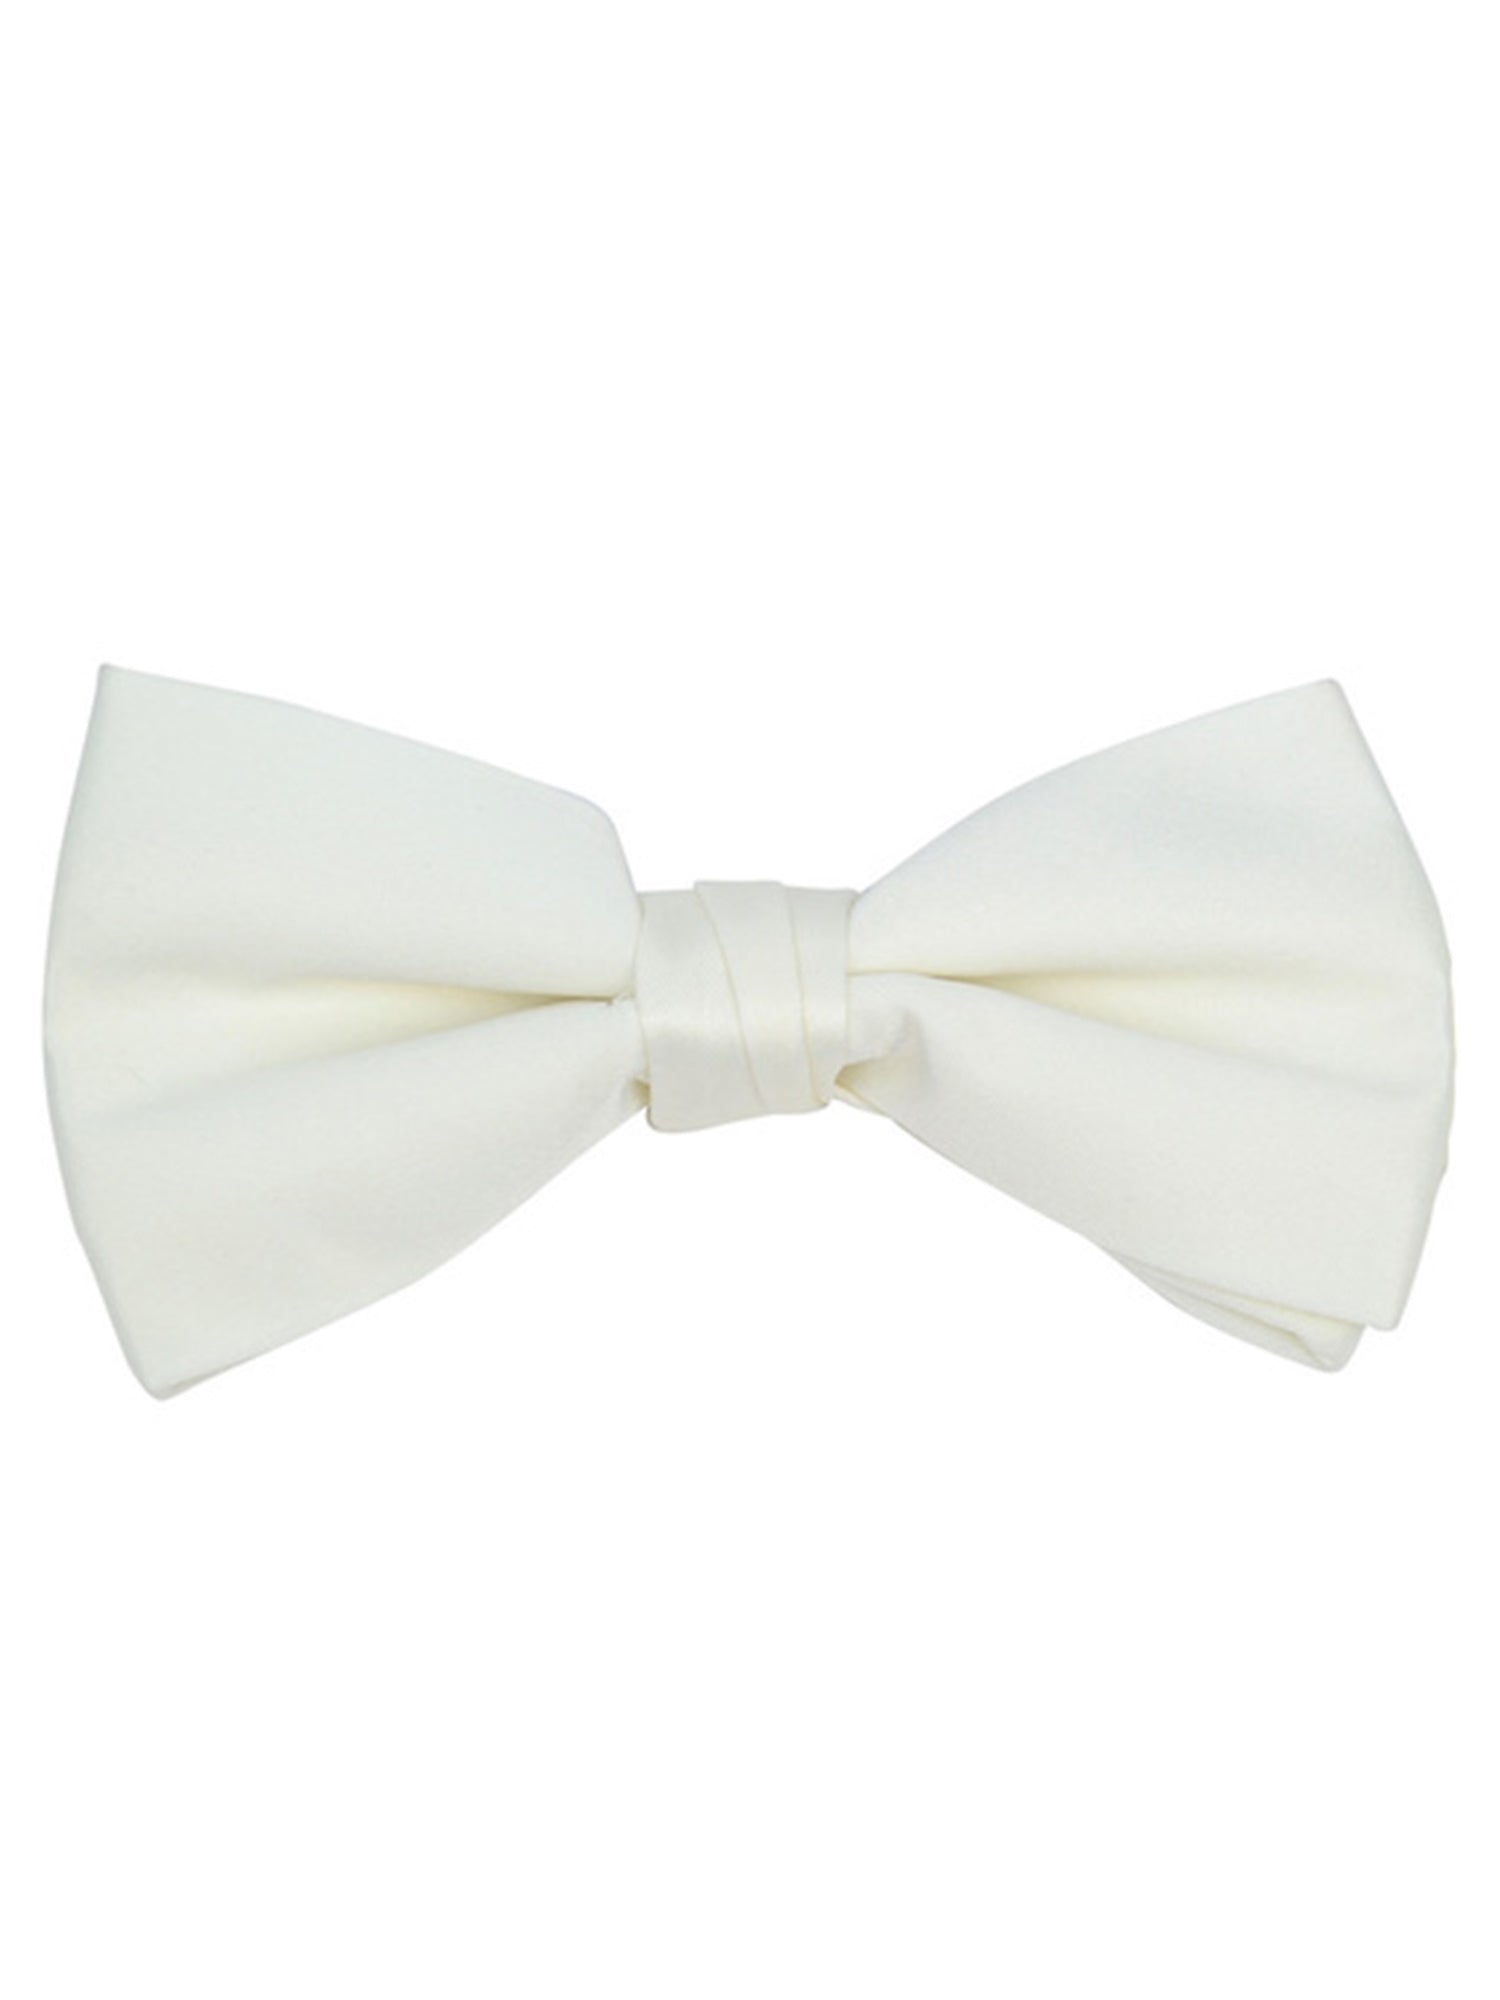 Young Boy's Pre-tied Adjustable Length Bow Tie - Formal Tuxedo Solid Color Boy's Solid Color Bow Tie TheDapperTie Off White One Size 